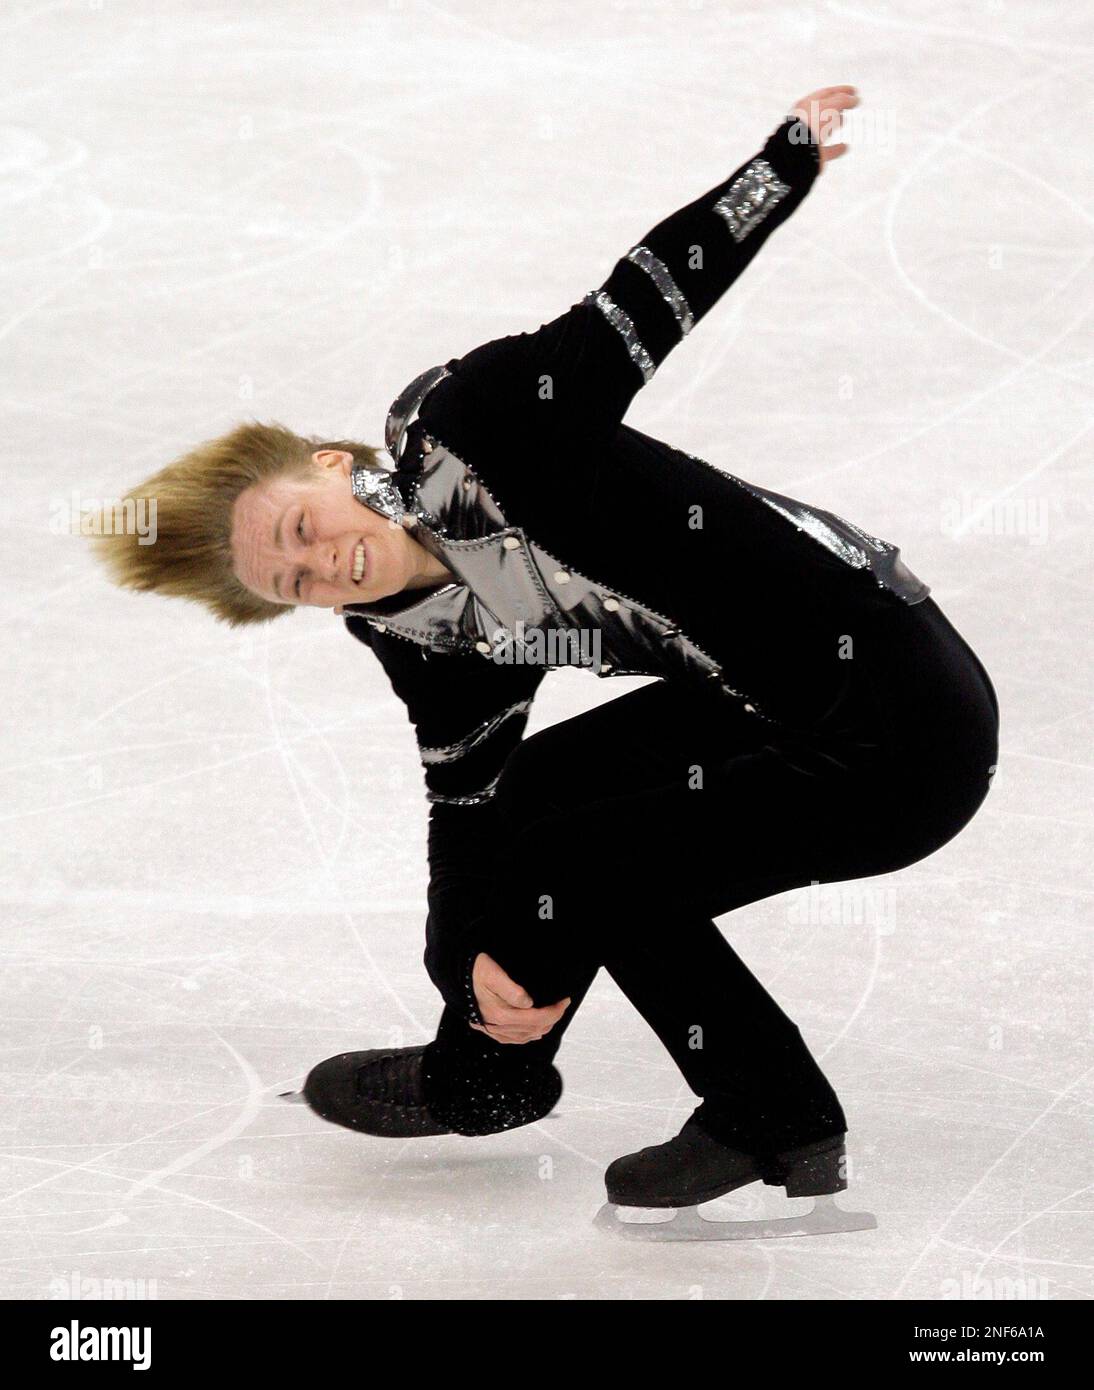 Kristoffer Berntsson, of Sweden, skates during the men's free skate at the World Figure Skating Championships in Los Angeles, Thursday, March 26, 2009. (AP Photo/Jae C. Hong) Stock Photo